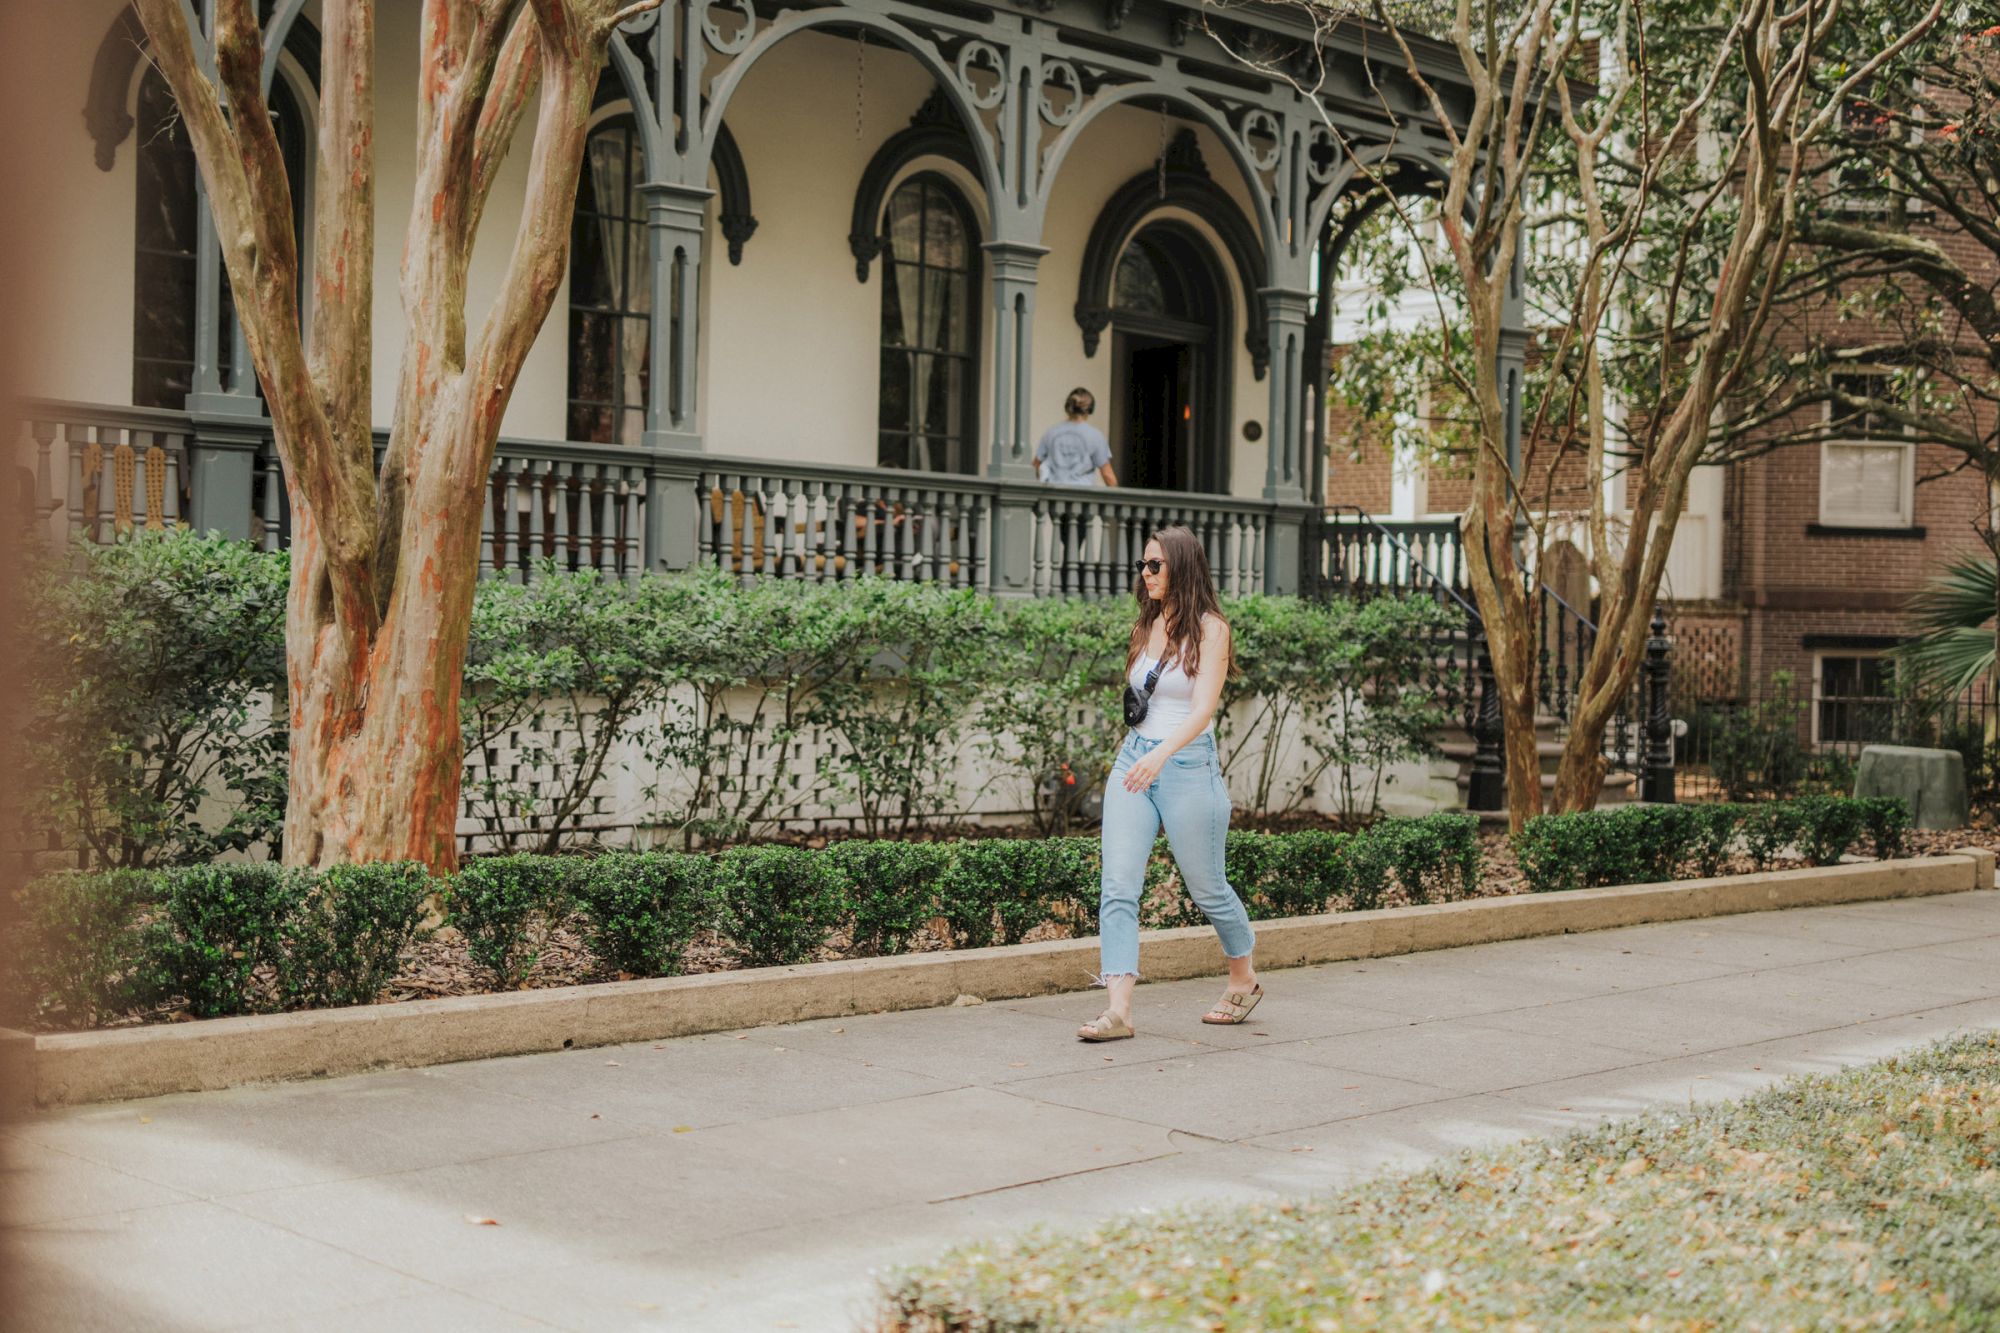 A woman is walking on a sidewalk in front of a house with ornate architectural features and surrounded by greenery.